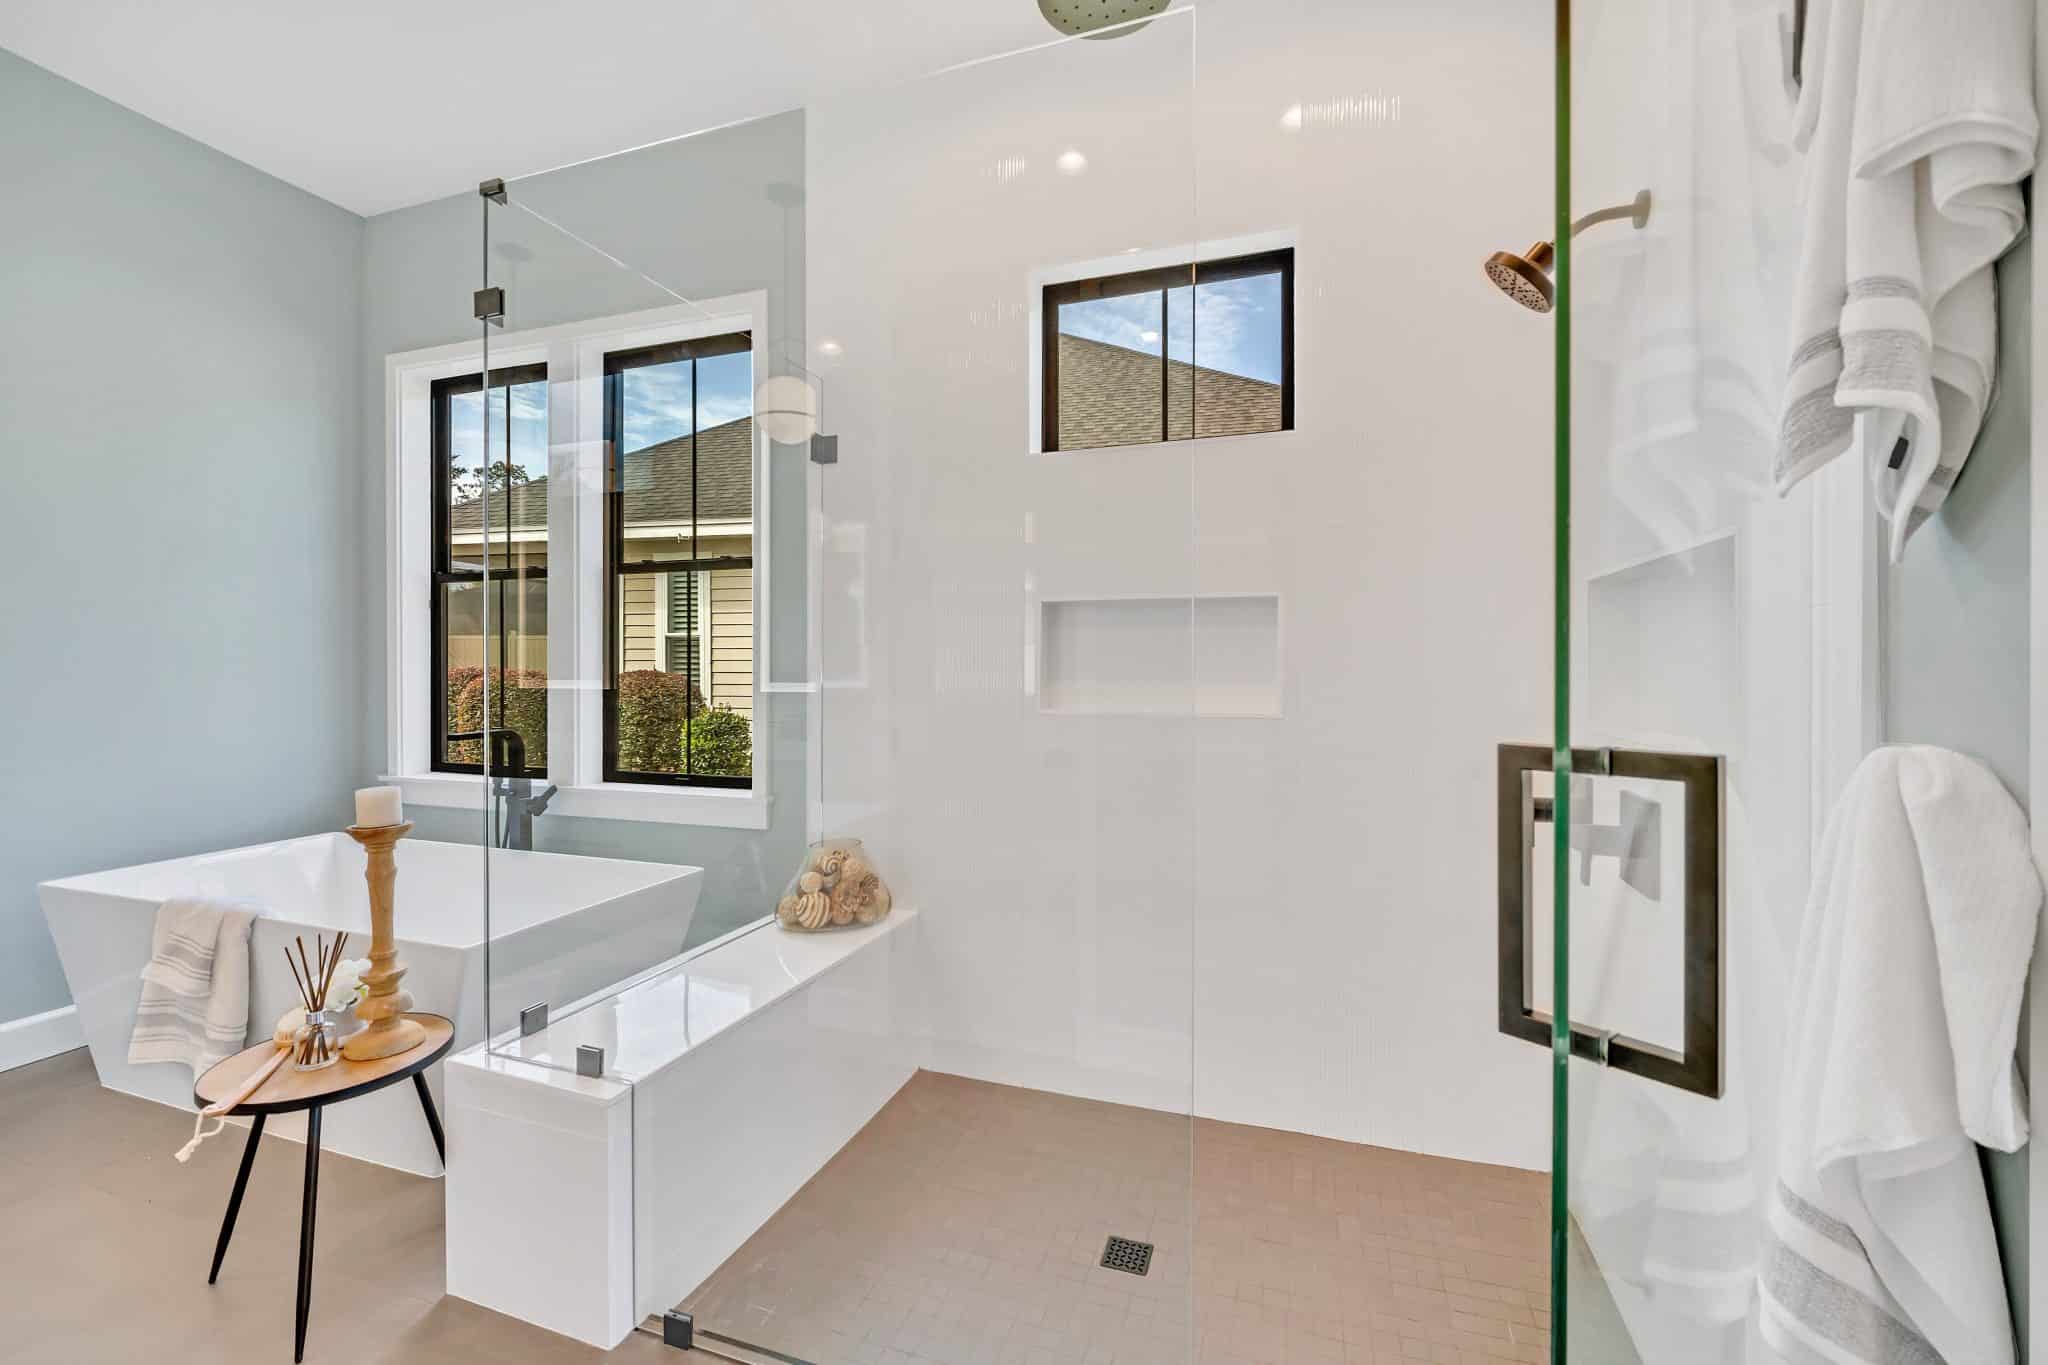 A view of a staged bathroom's walk-in shower and bath tub.